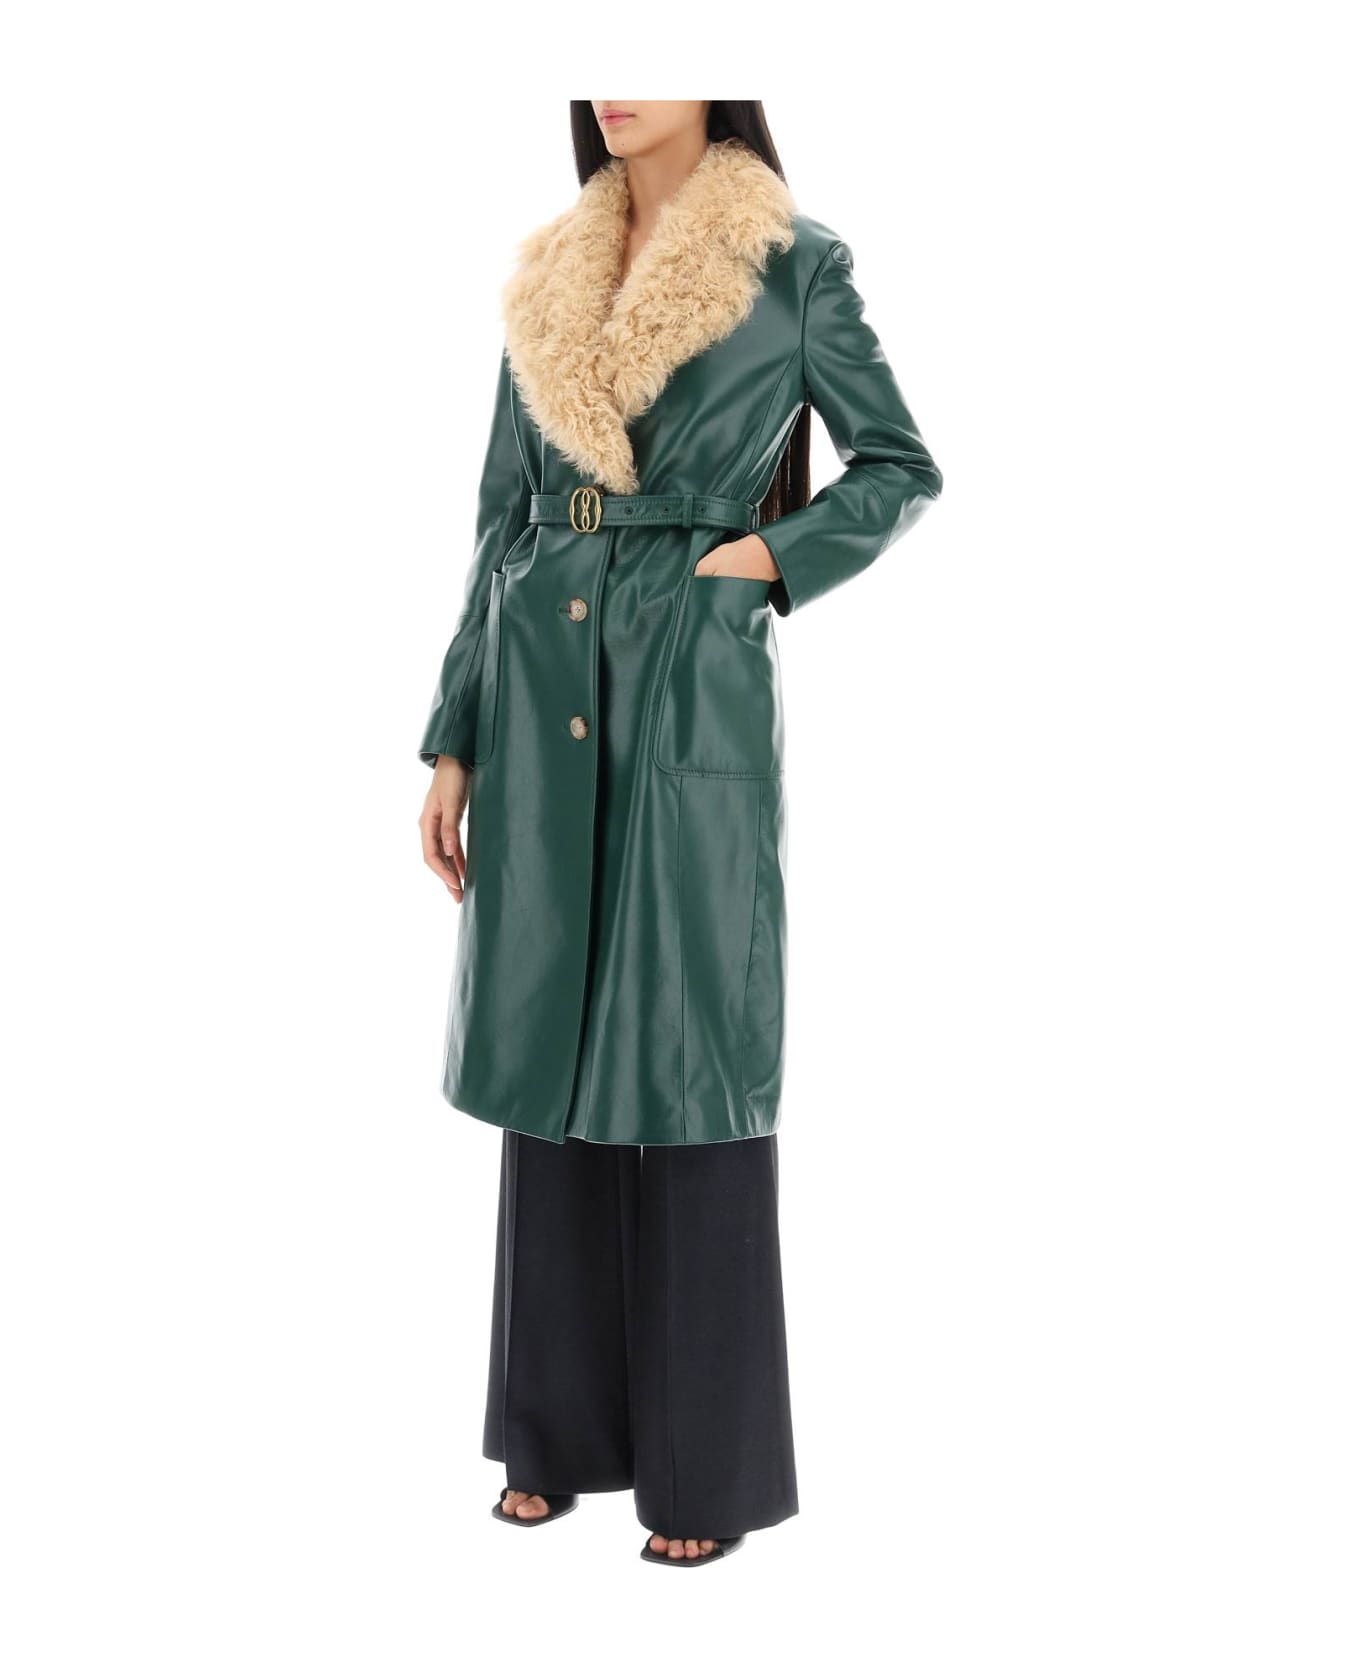 Bally Leather And Shearling Coat - KELLY GREEN 23 (Green) コート